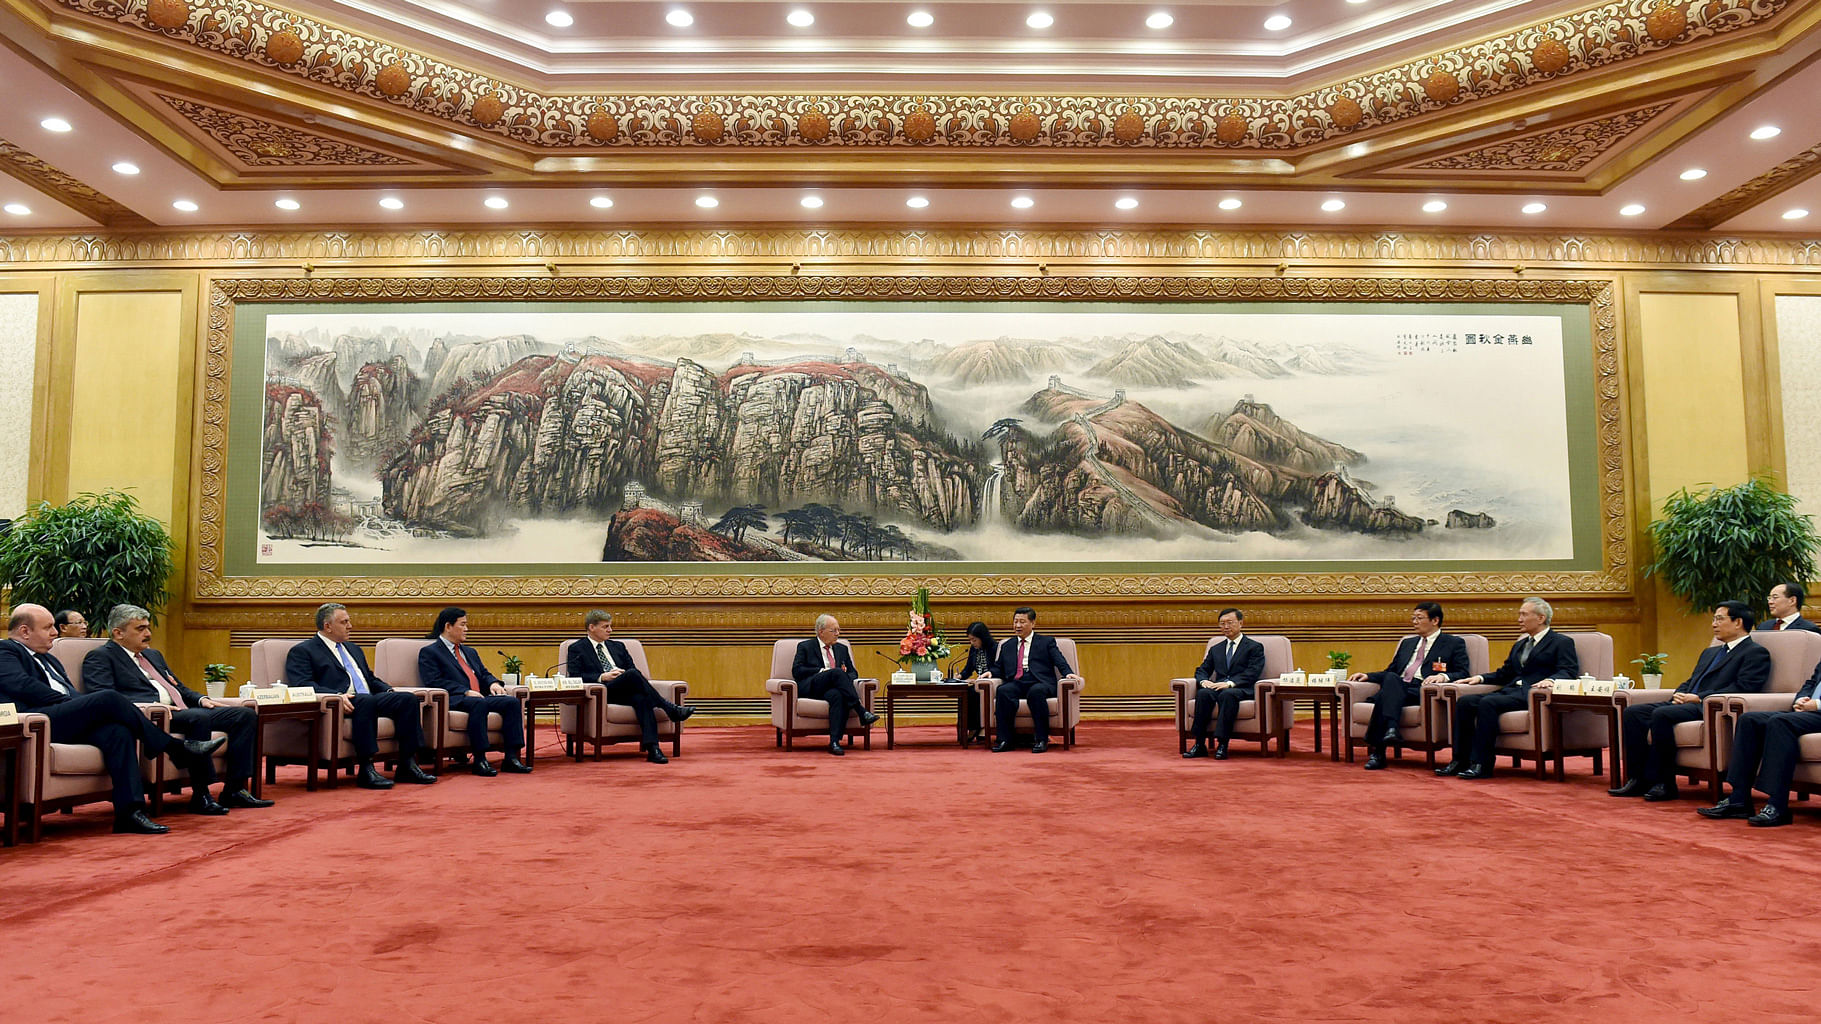 The AIIB Meet between Chinese President Xi Jinping and delegates from 50 countries at the Great Hall of the People in Beijing on June 29, 2015 (Courtesy: Reuters)